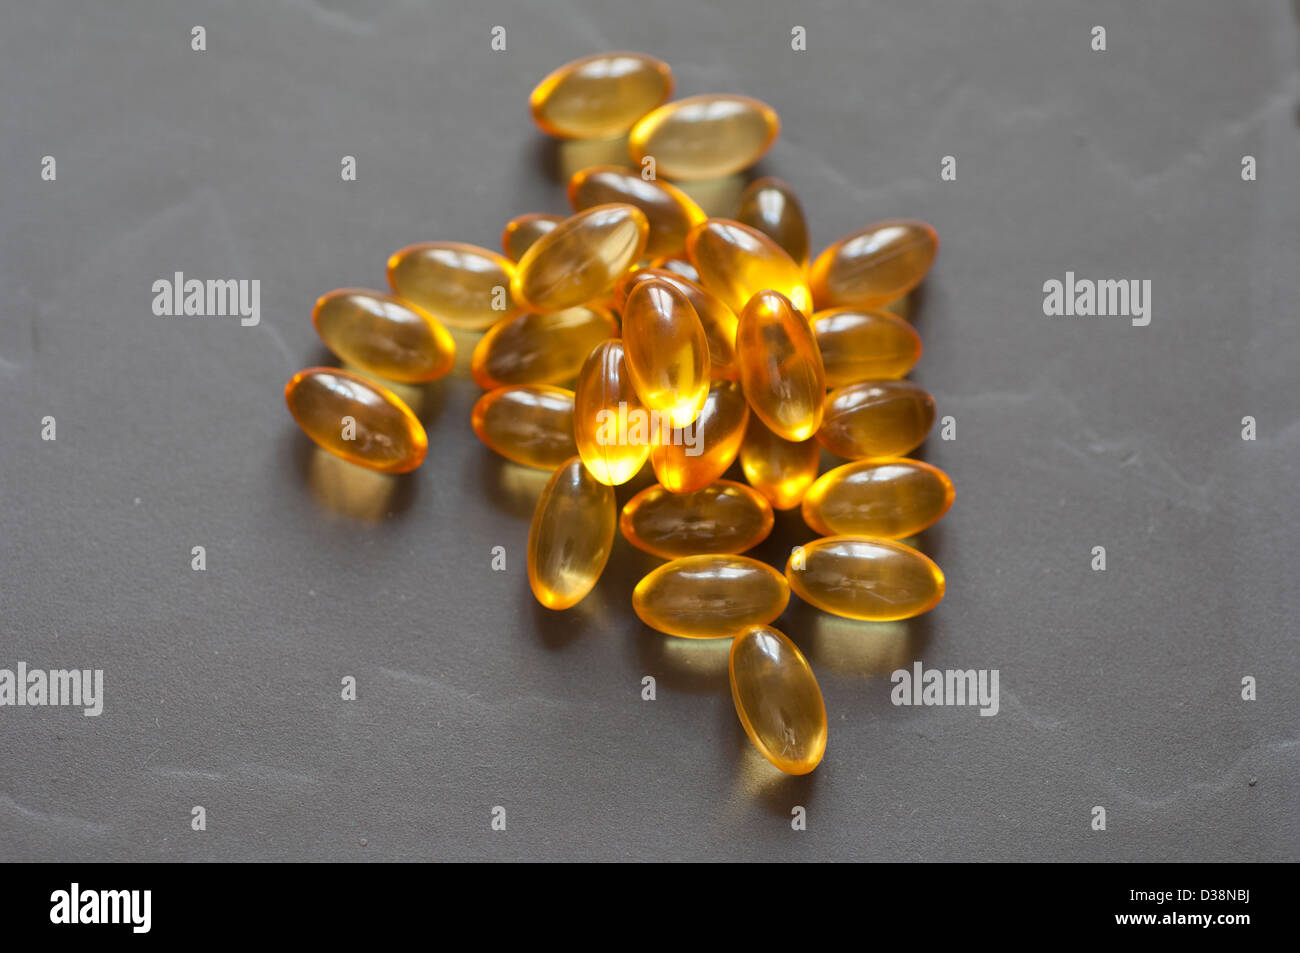 Close-up view of Vitamin E capsules dietary supplement Stock Photo